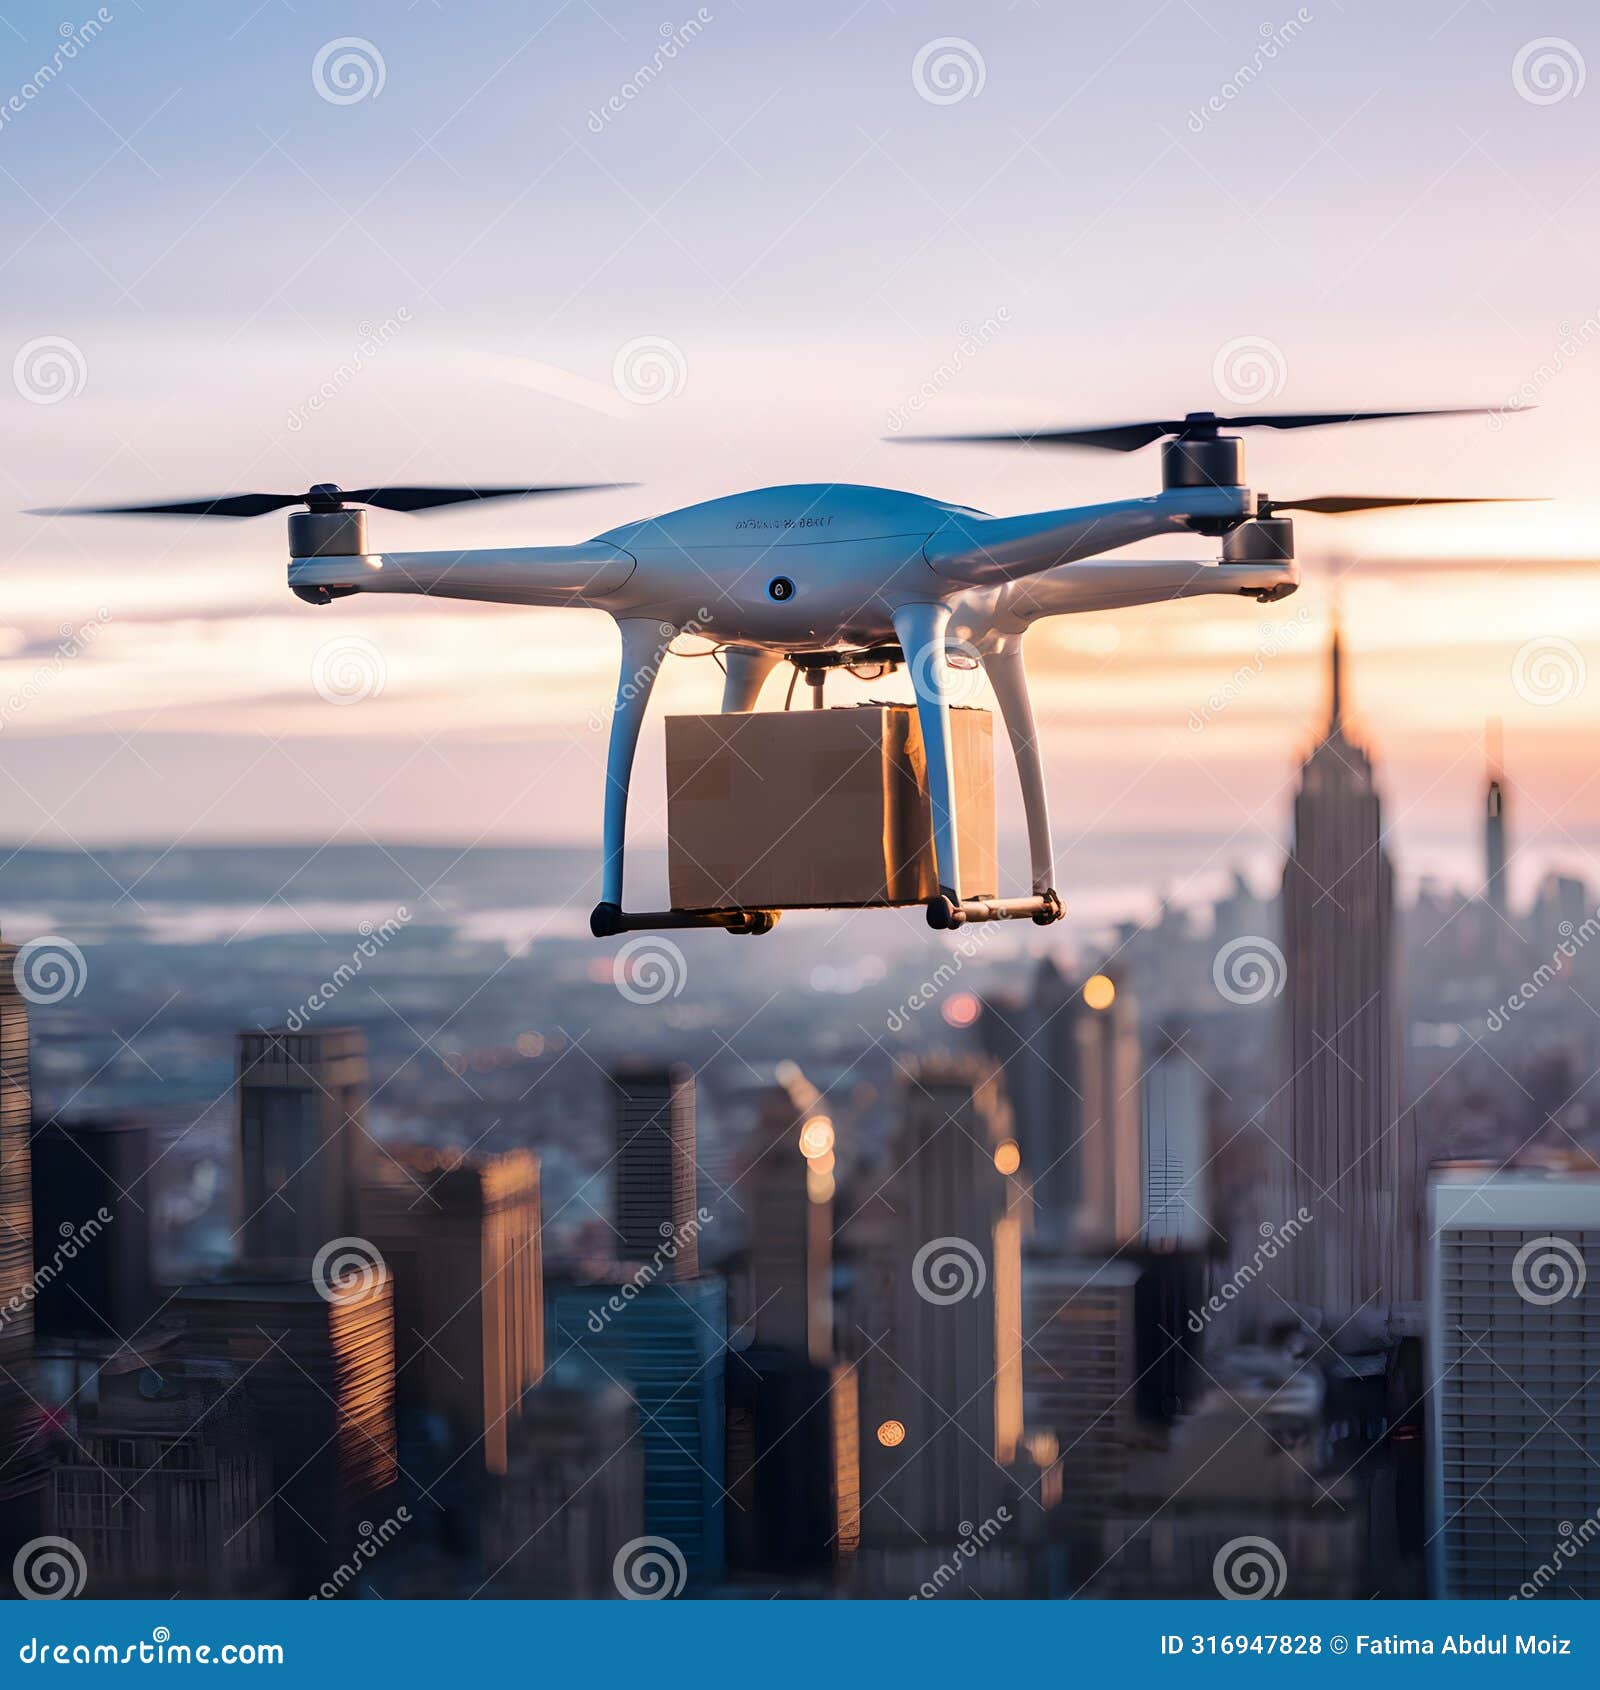 efficient and fast drone package delivery showcased in the city